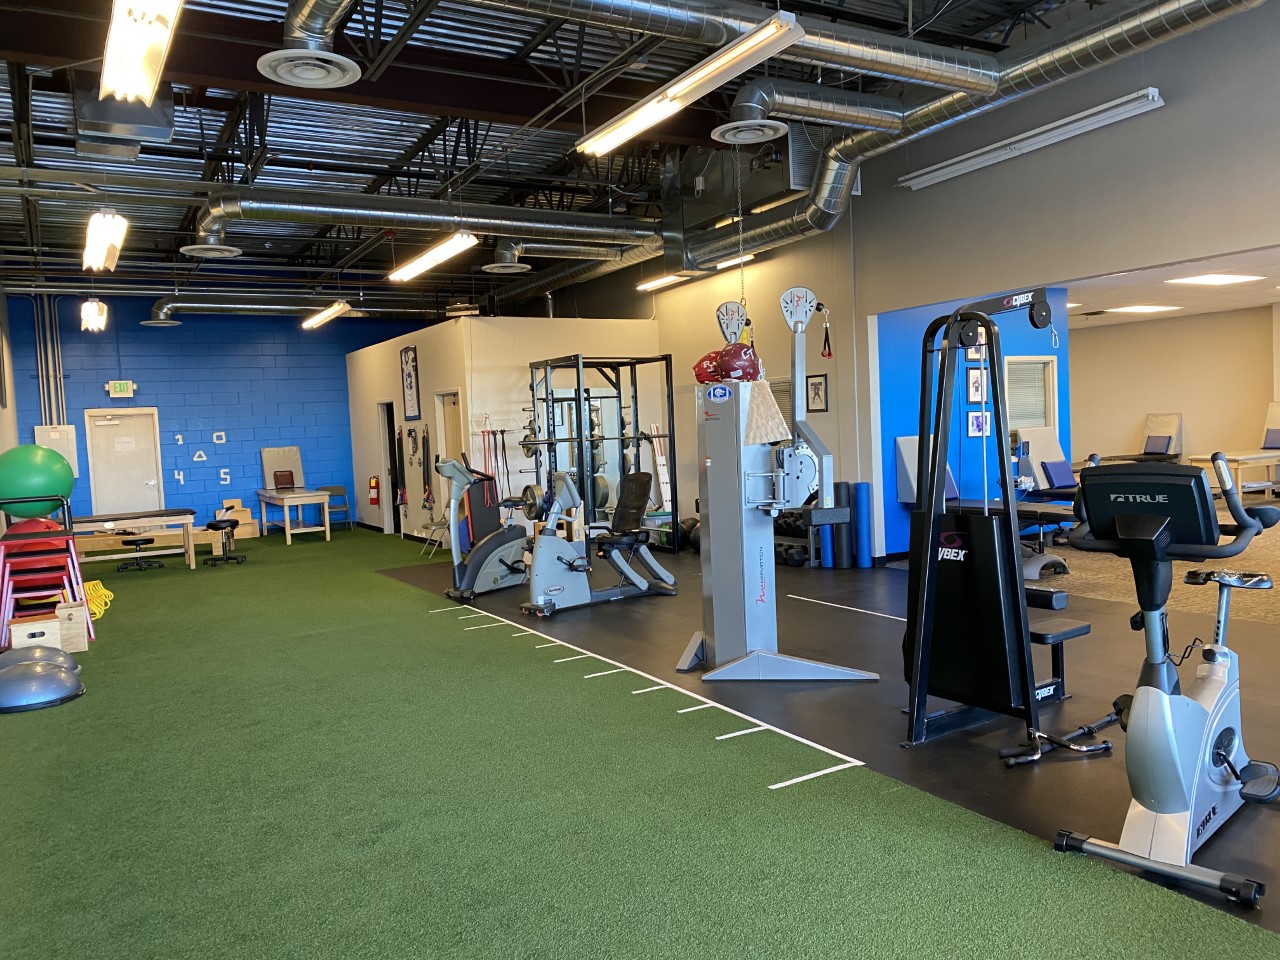 ProActive Physical Therapy
24300 E Smoky Hill Rd
Aurora